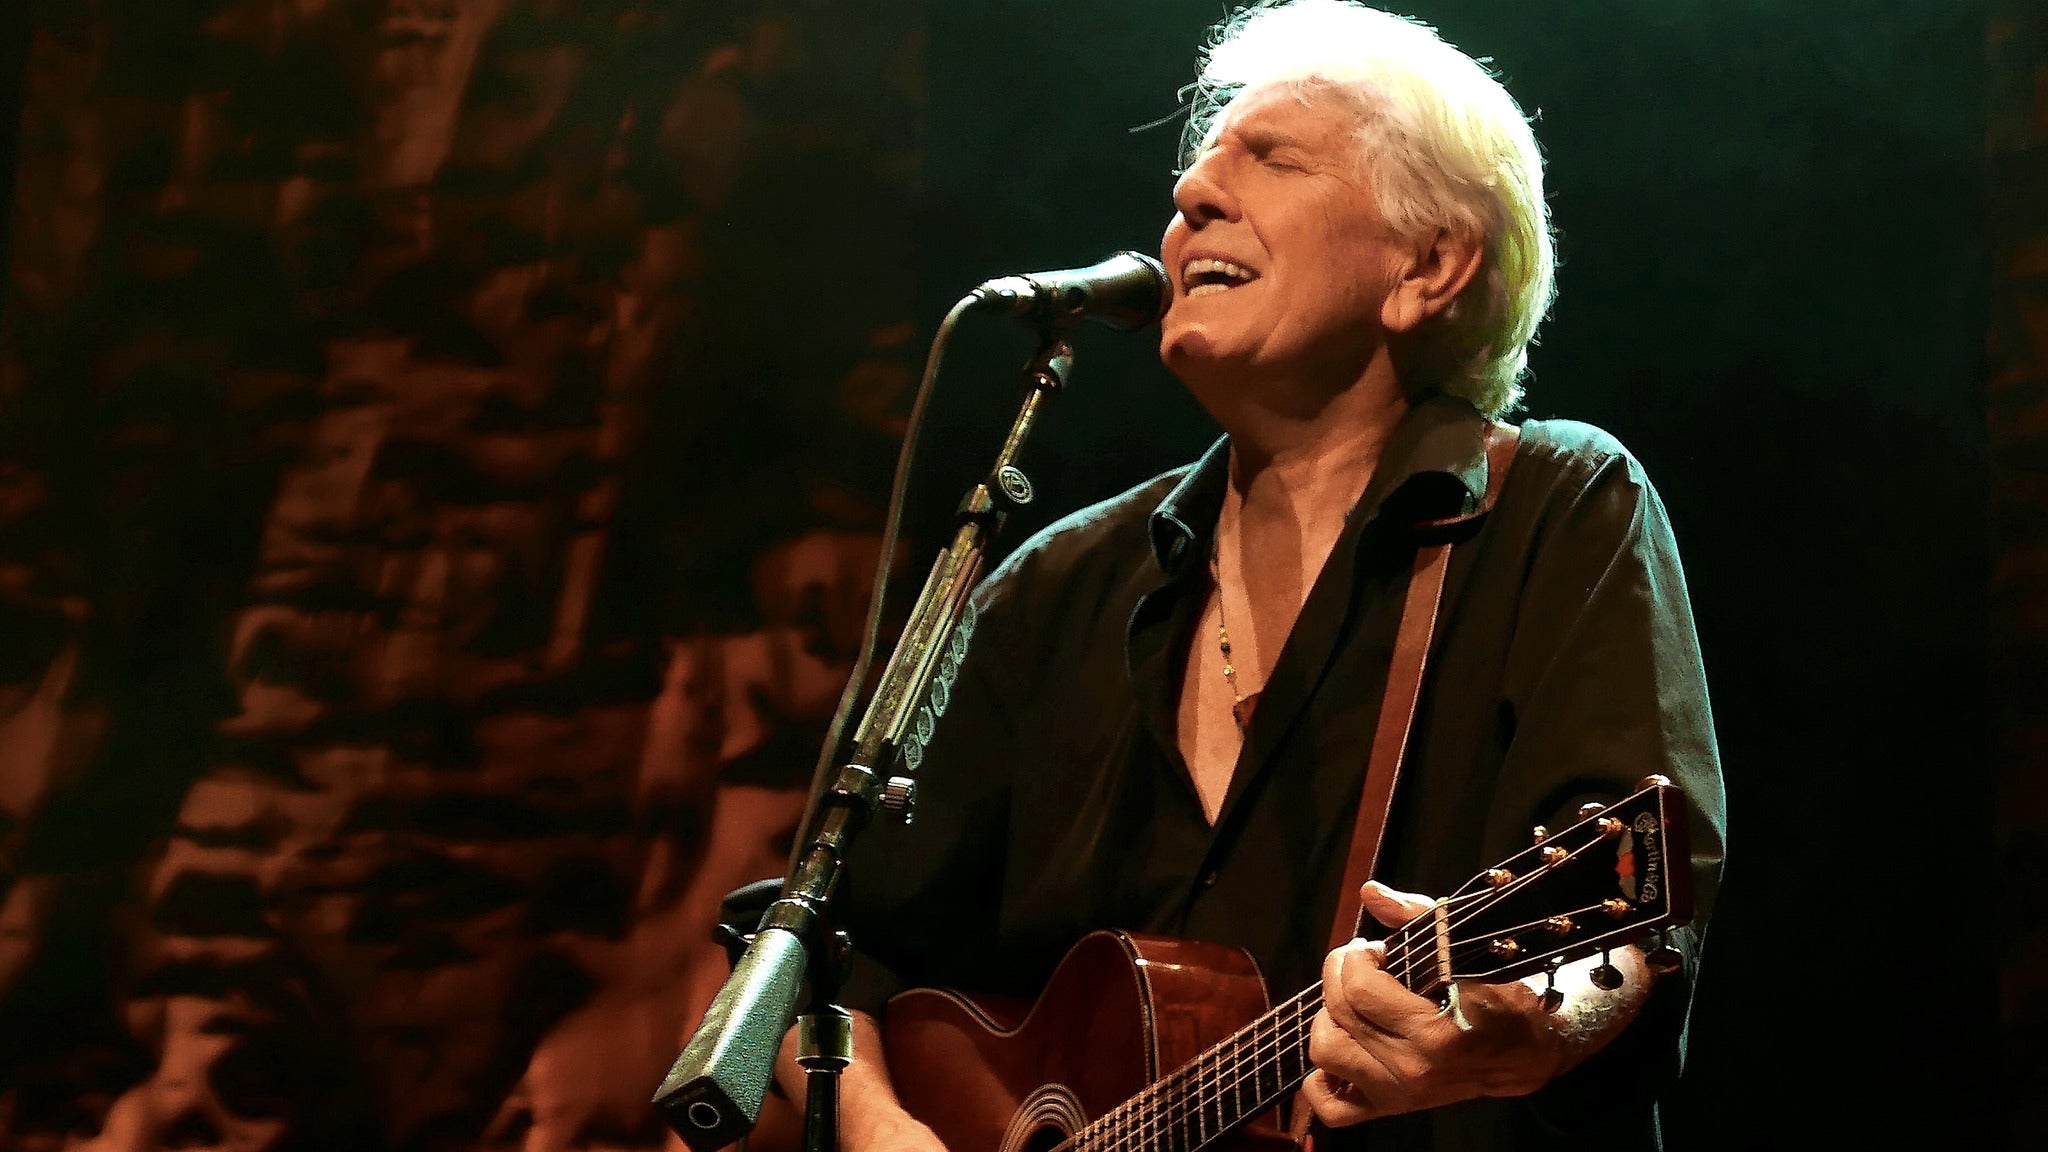 Graham Nash - Sixty Years Of Songs And Stories